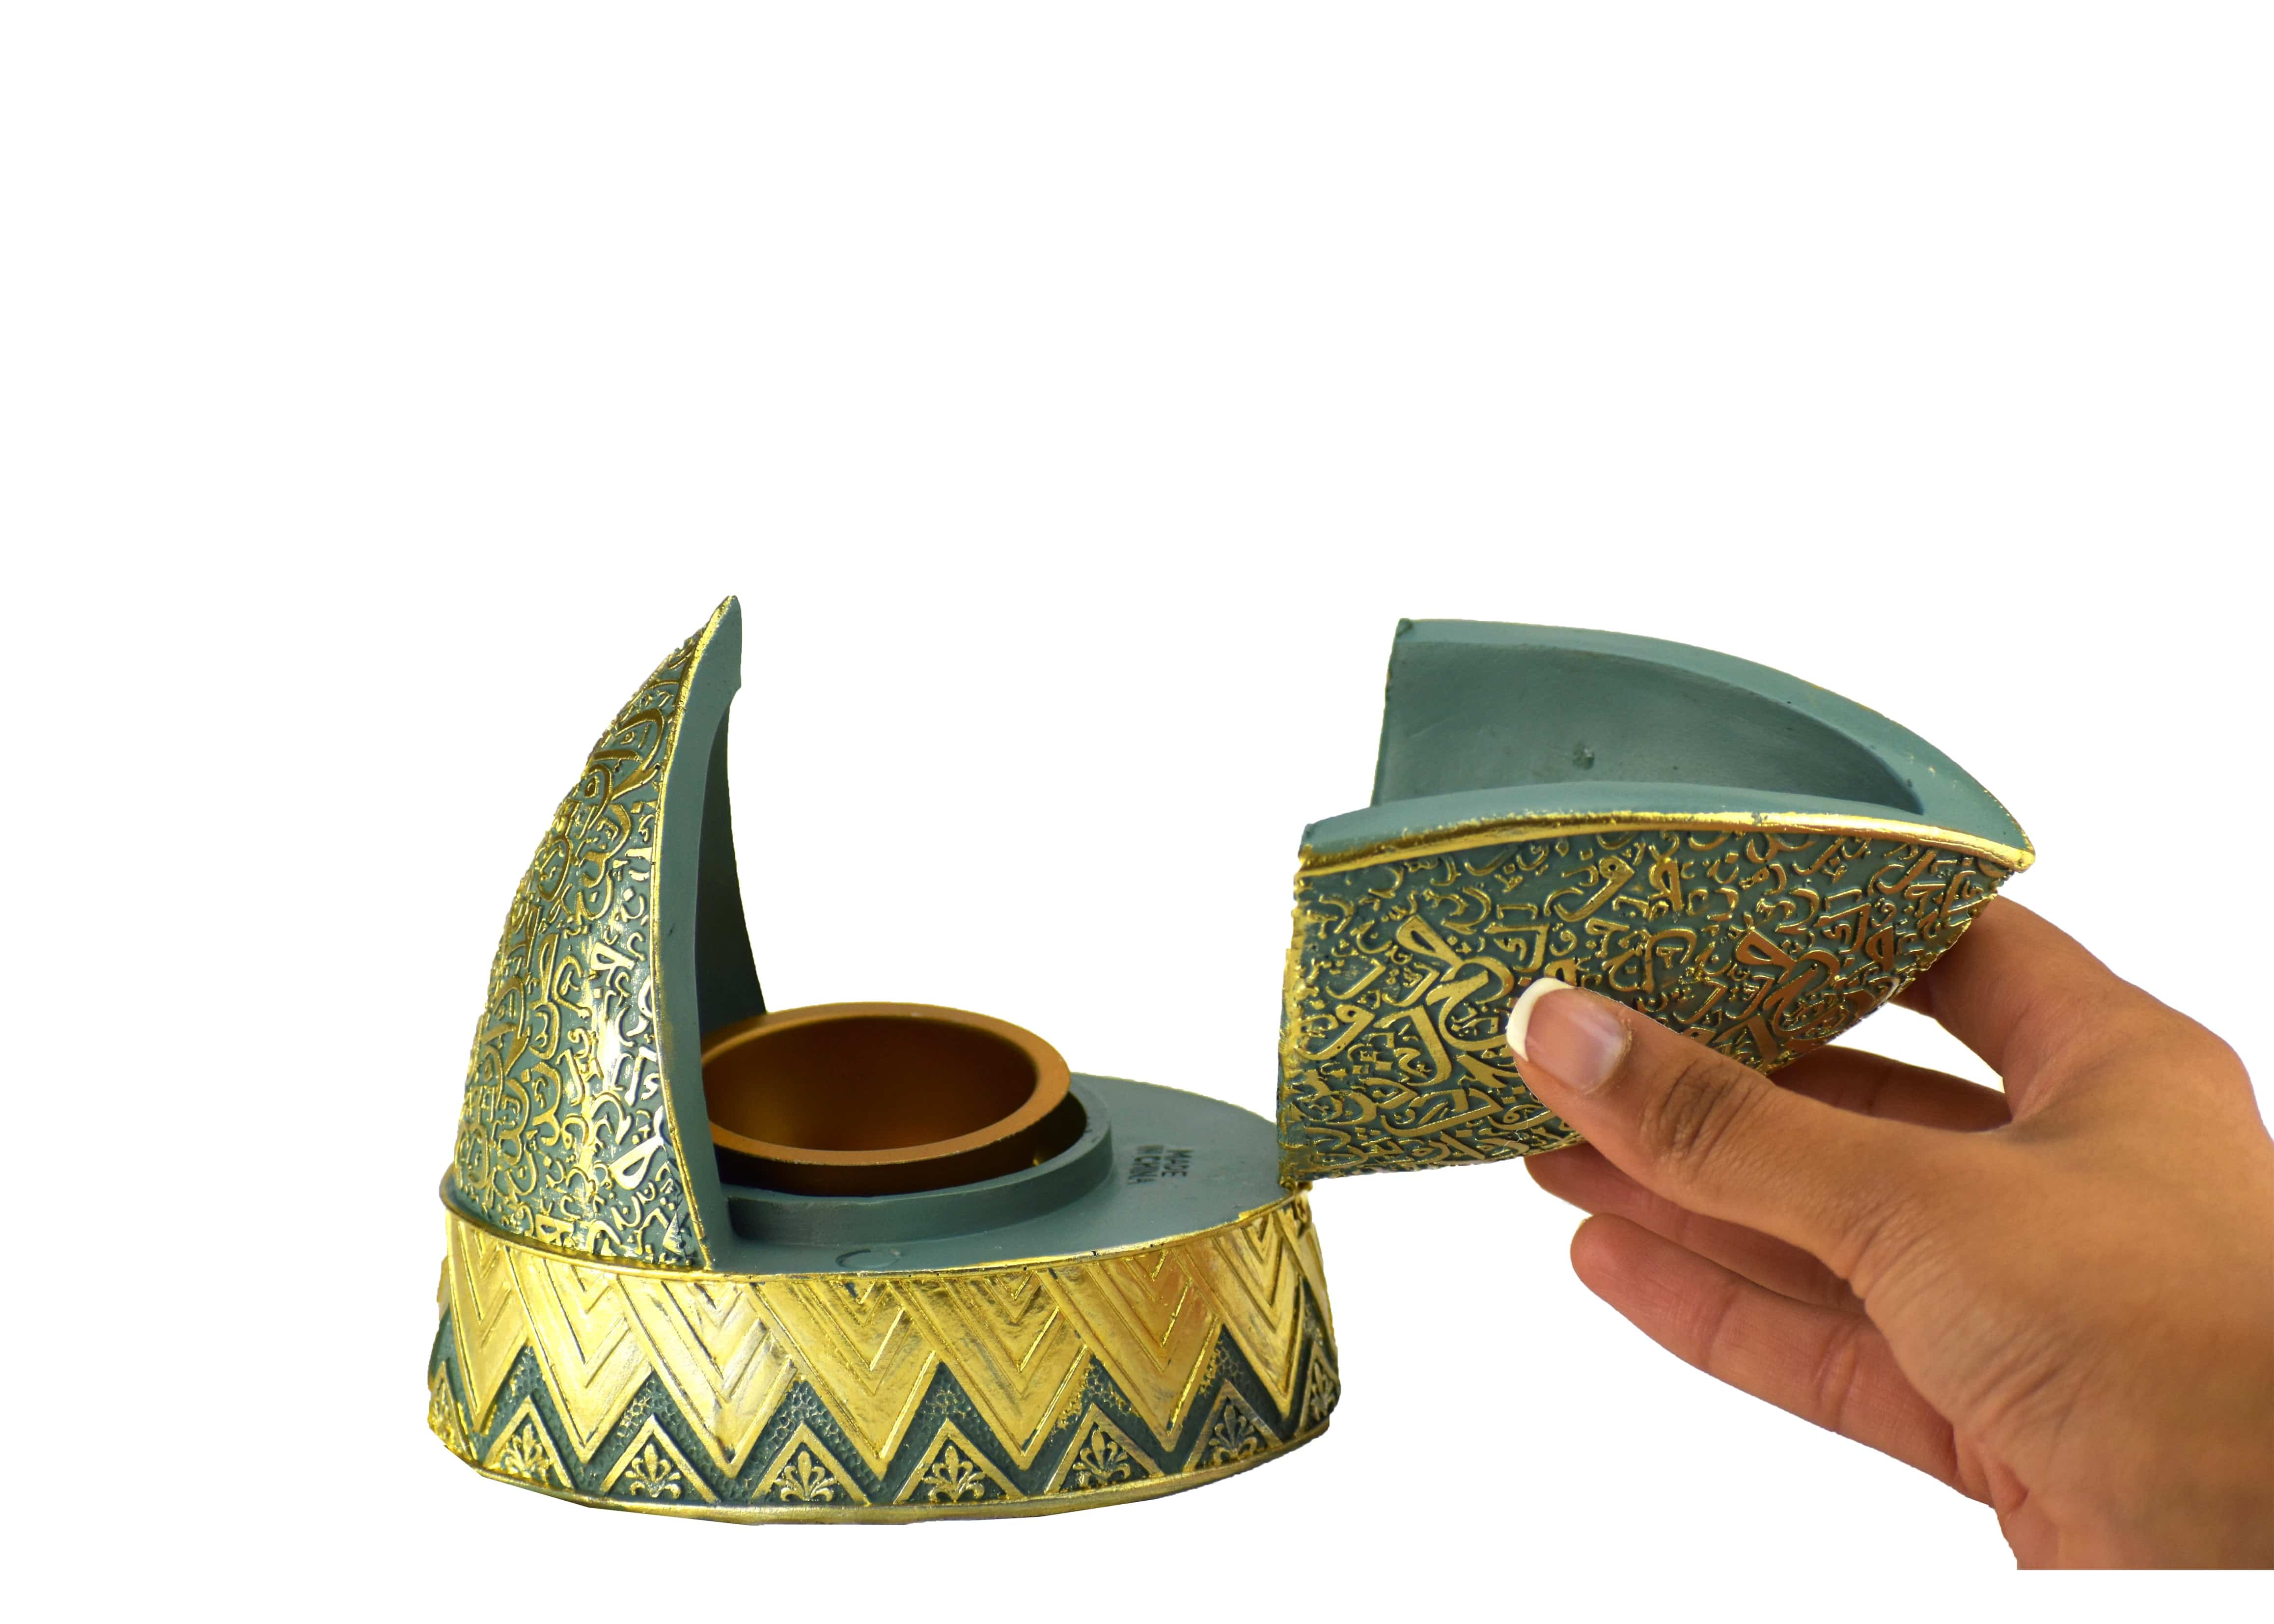 Calligraphy Arched Beehive Dome Style Closed Incense Bakhoor Burner - Teal - Intense oud